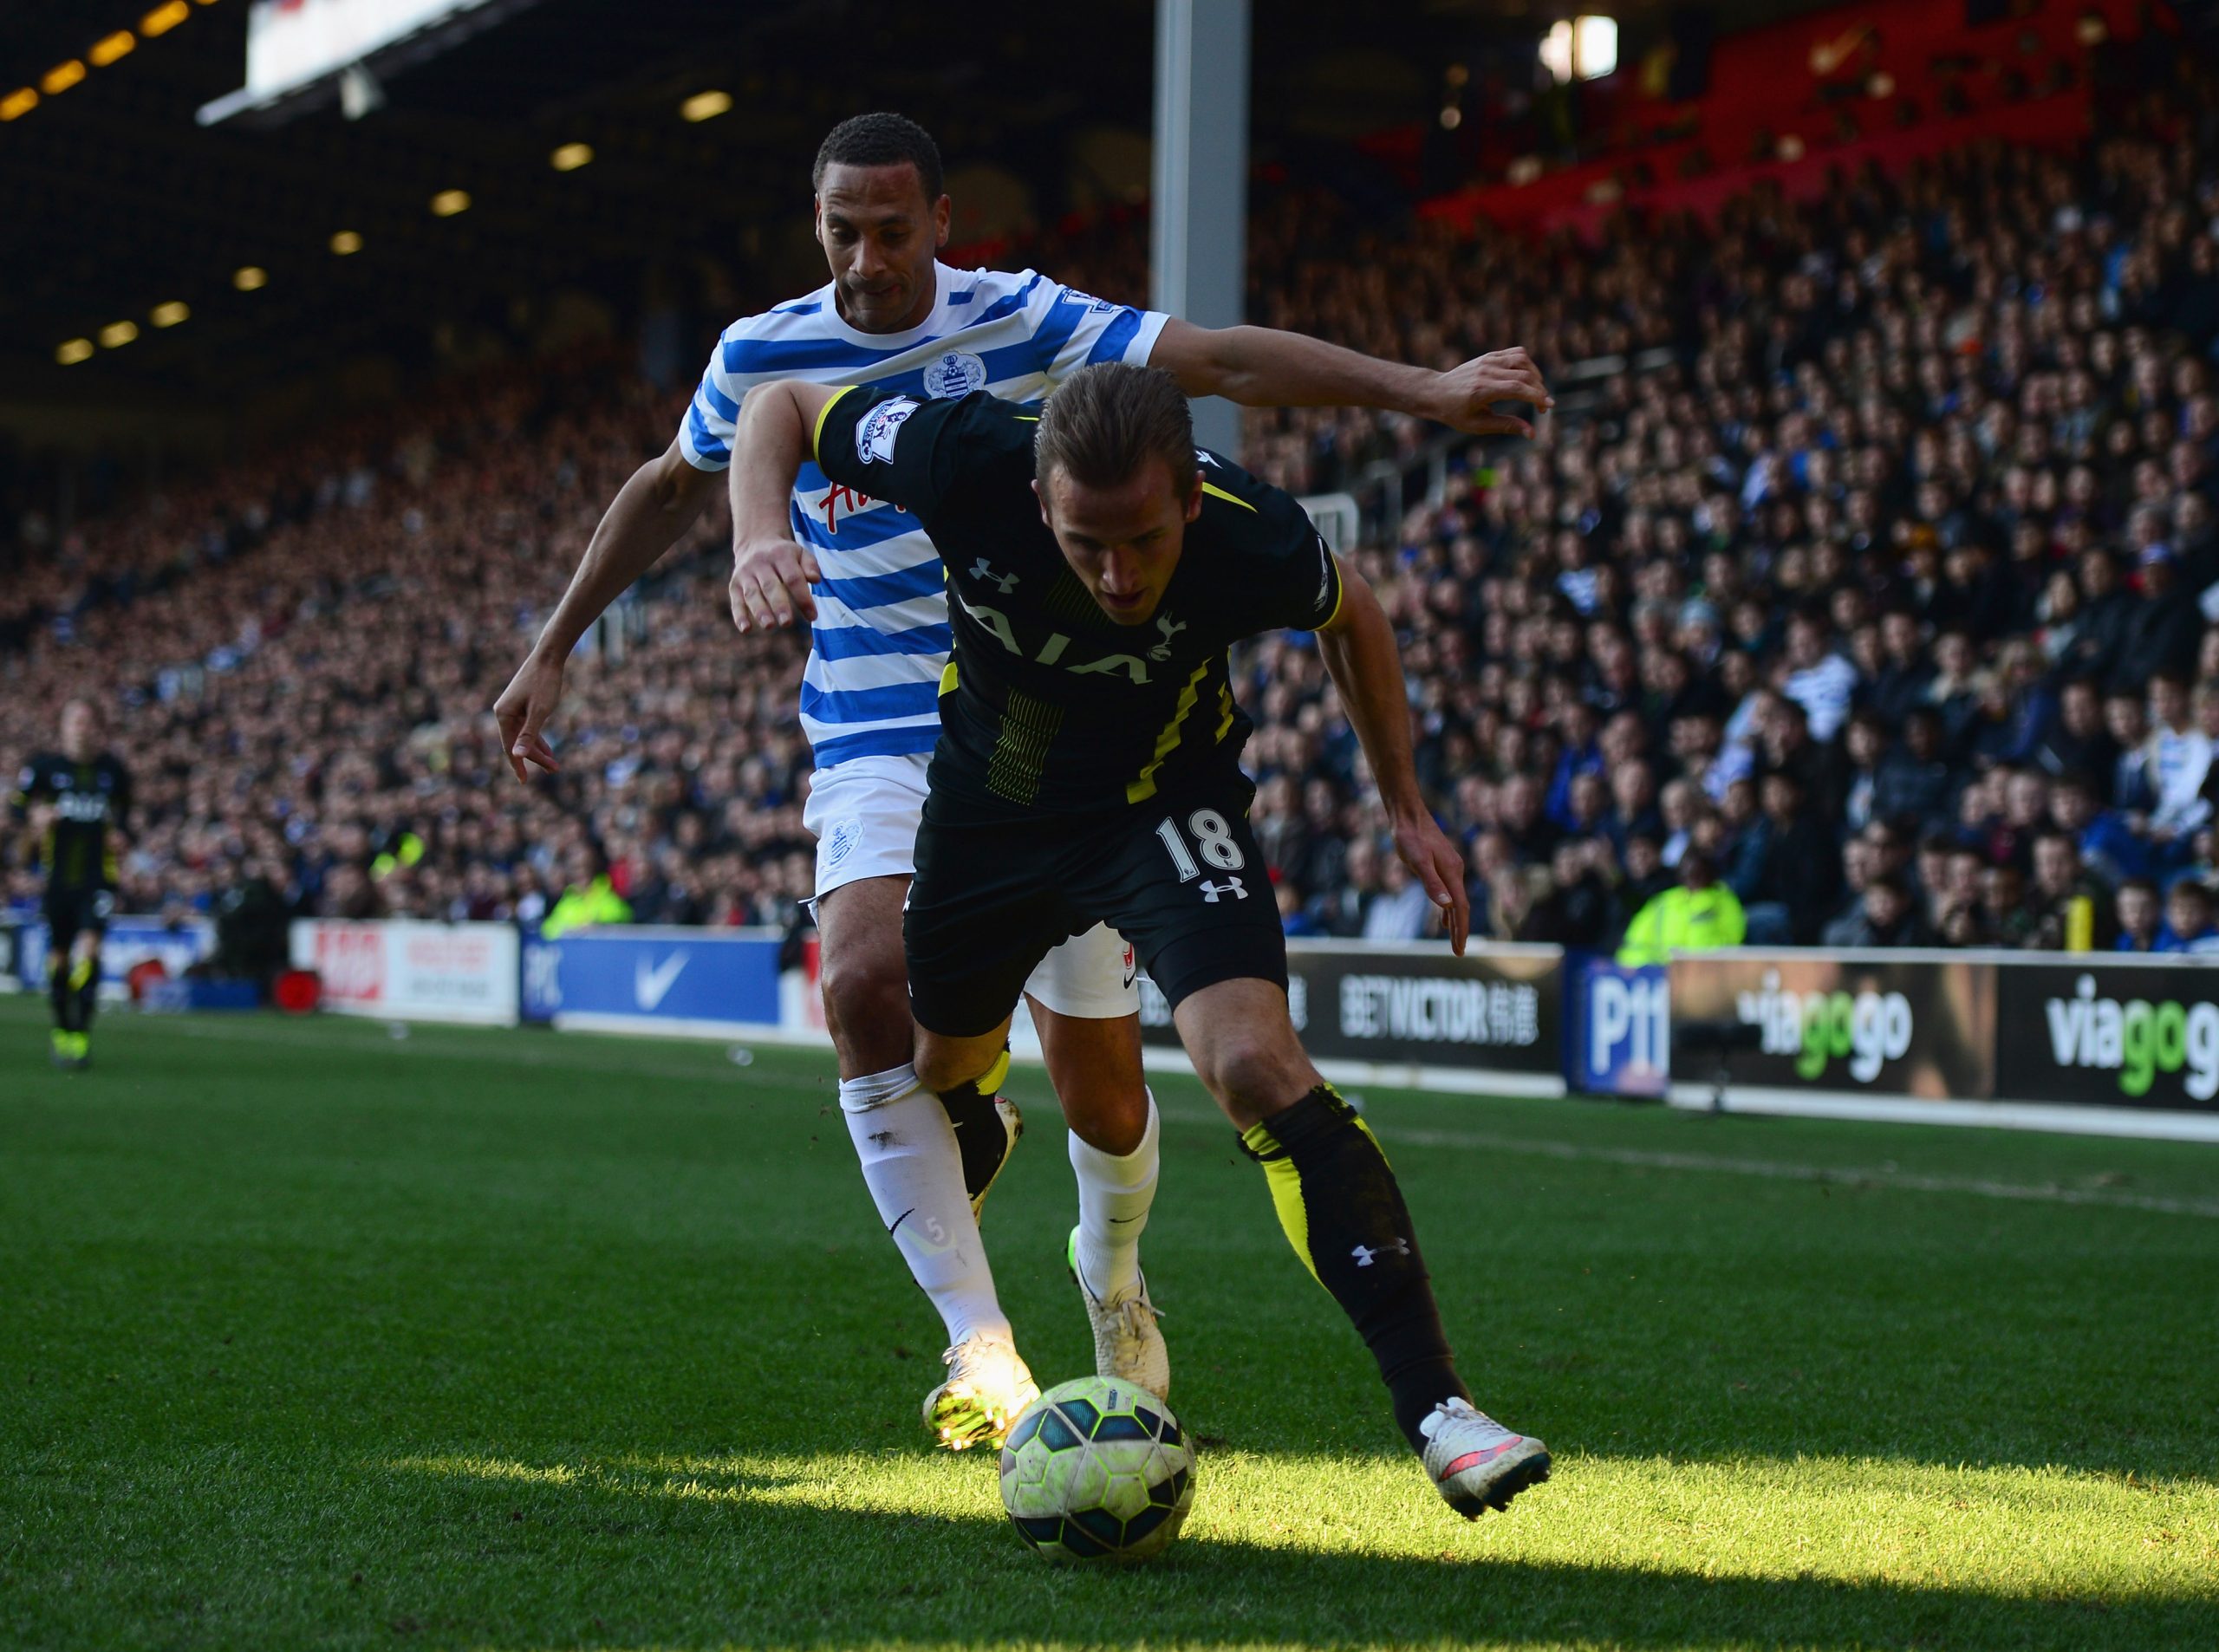 Harry Kane of Spurs evades Rio Ferdinand of QPR during a Barclays Premier League match in March, 2015.